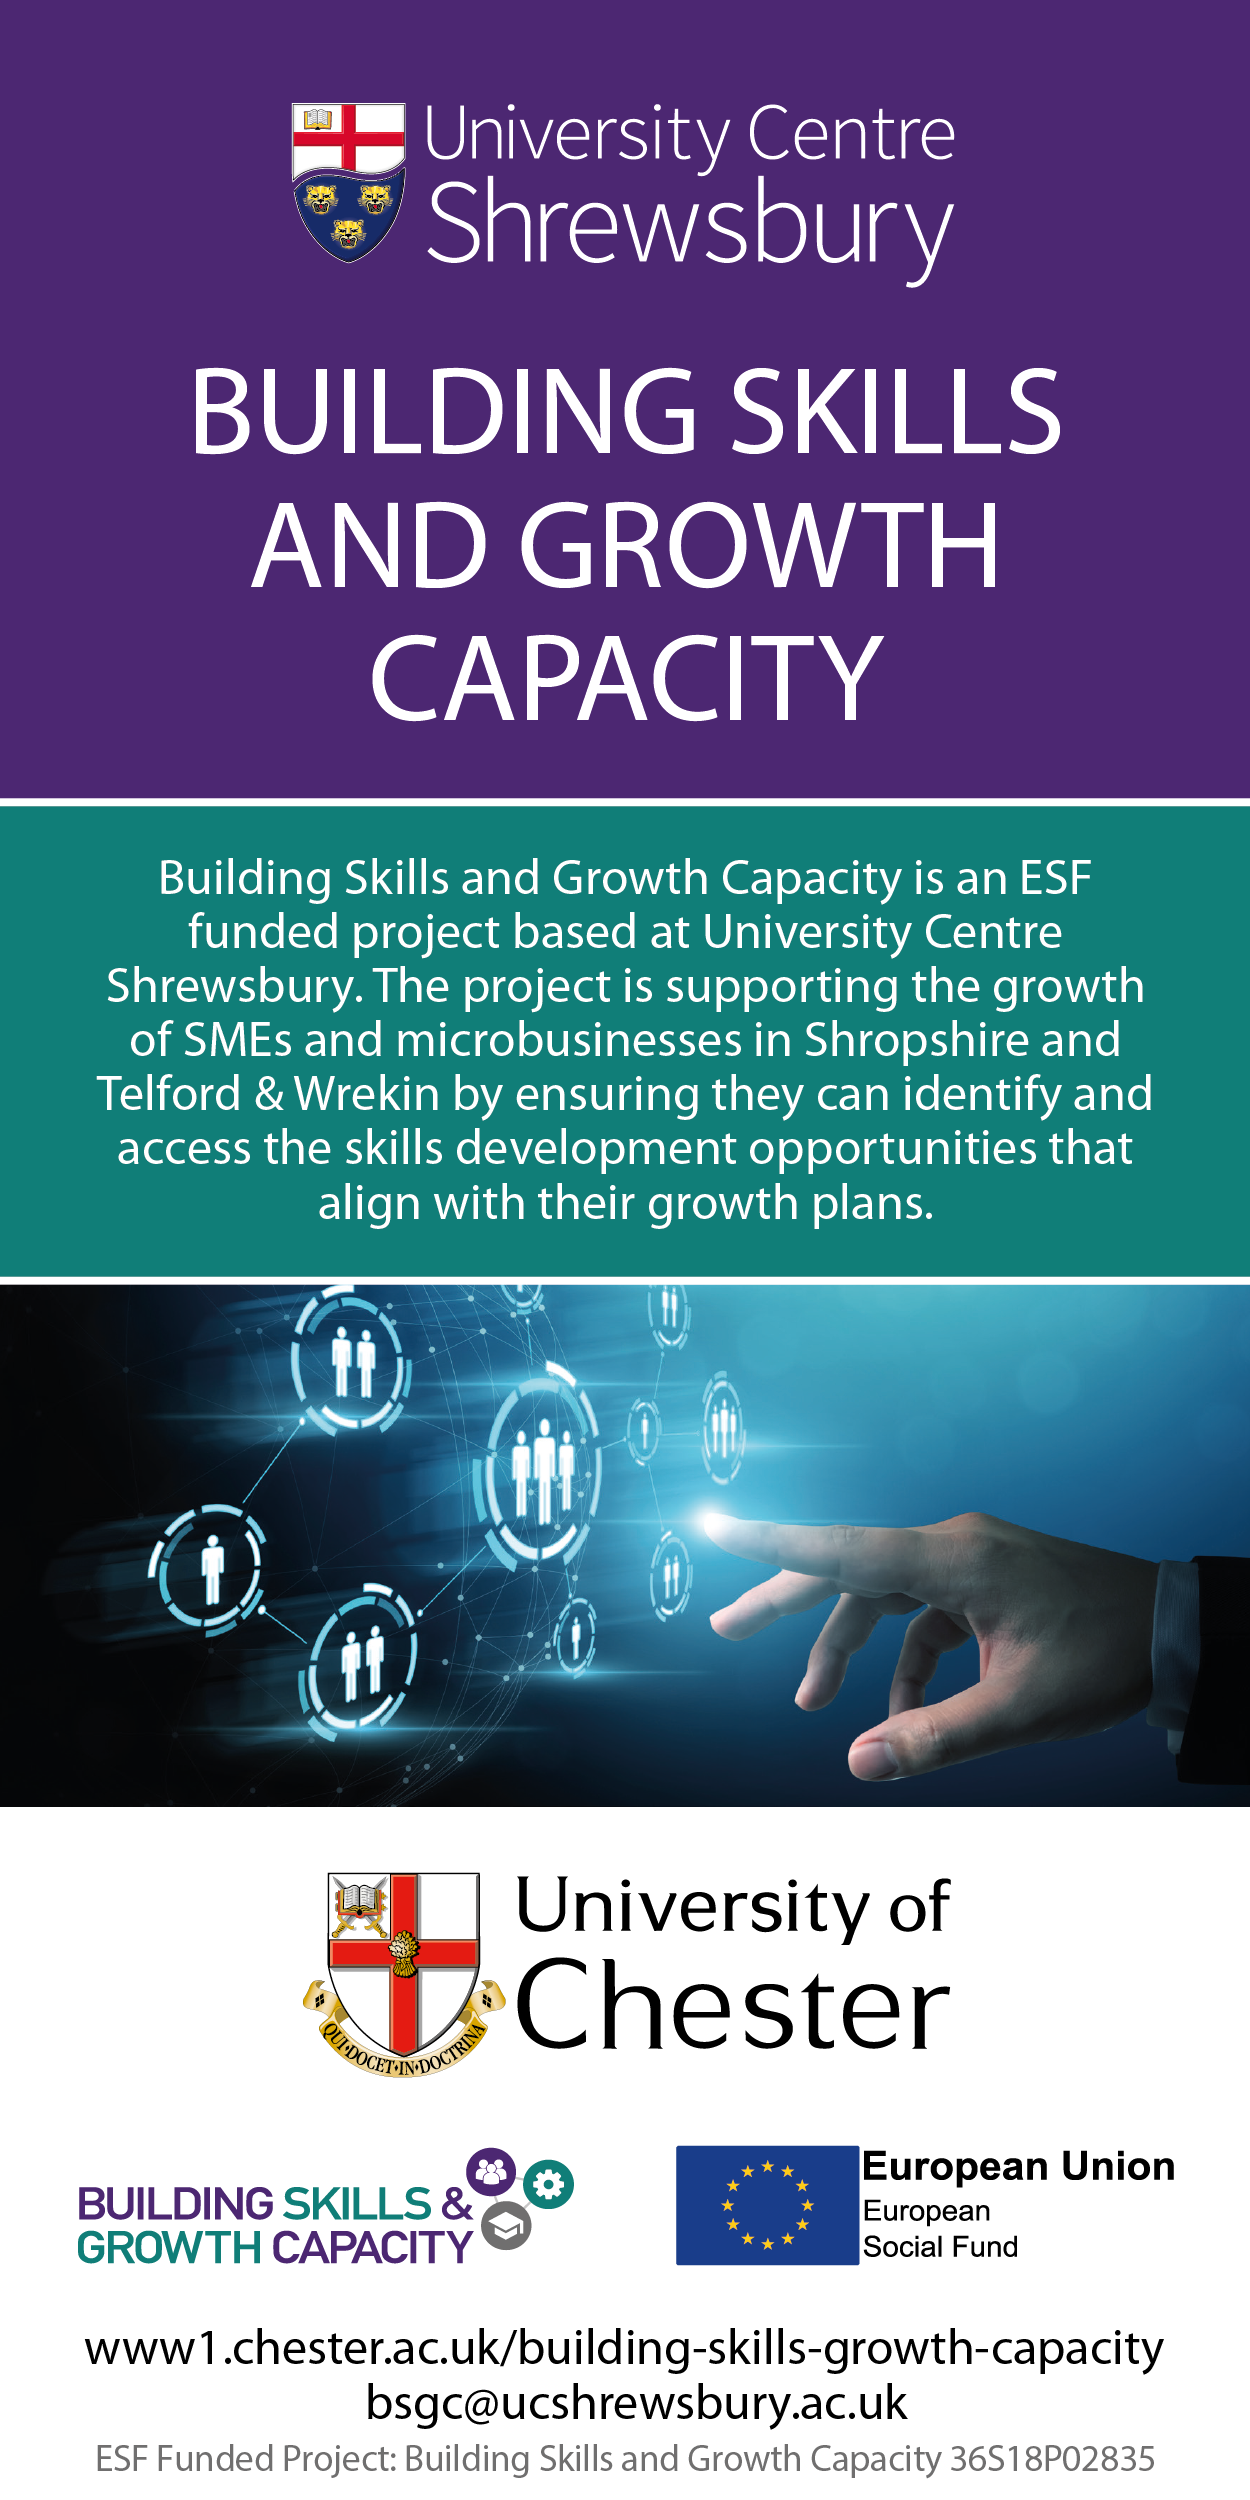 https://www1.chester.ac.uk/building-skills-growth-capacity